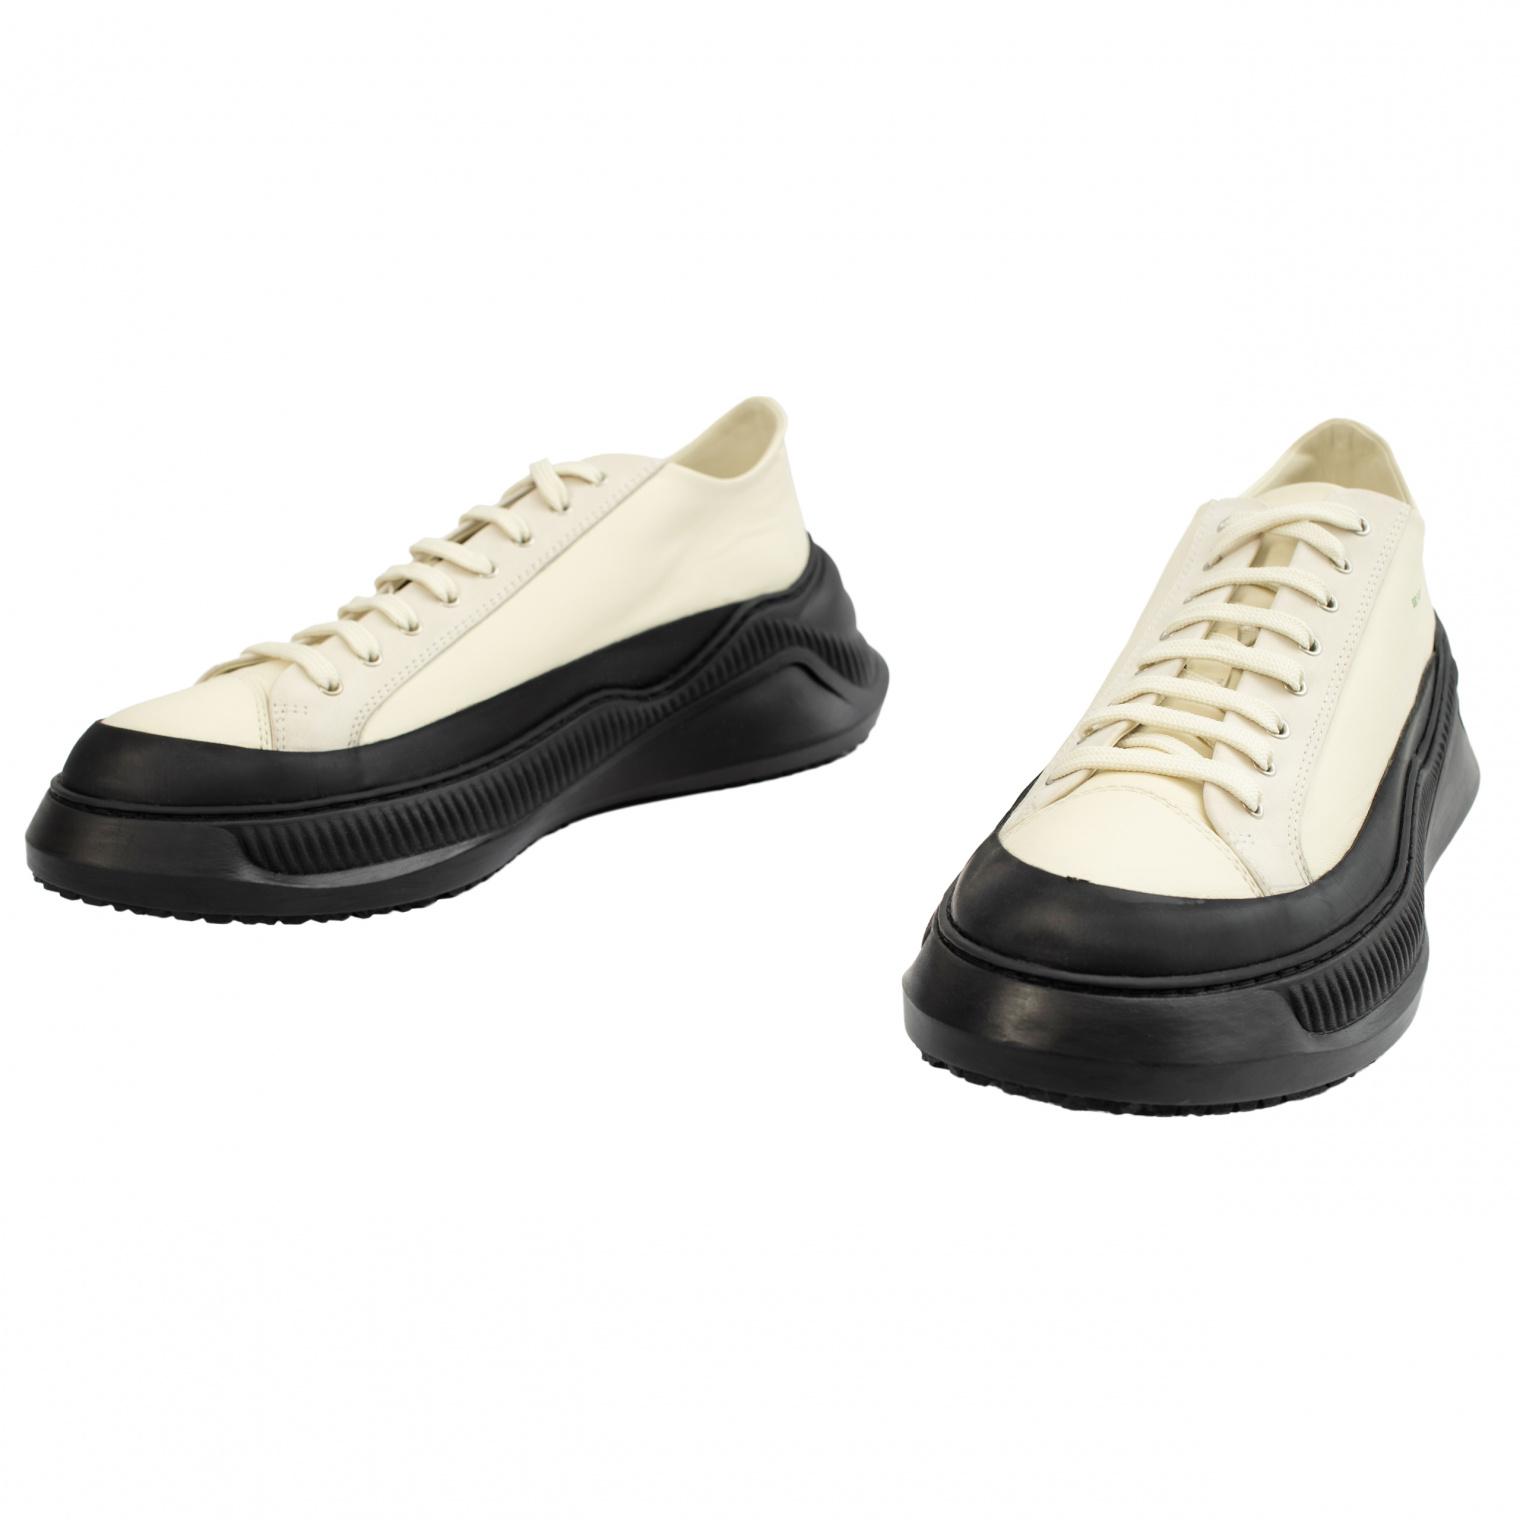 OAMC RUGGED SOLE white SNEAKERS